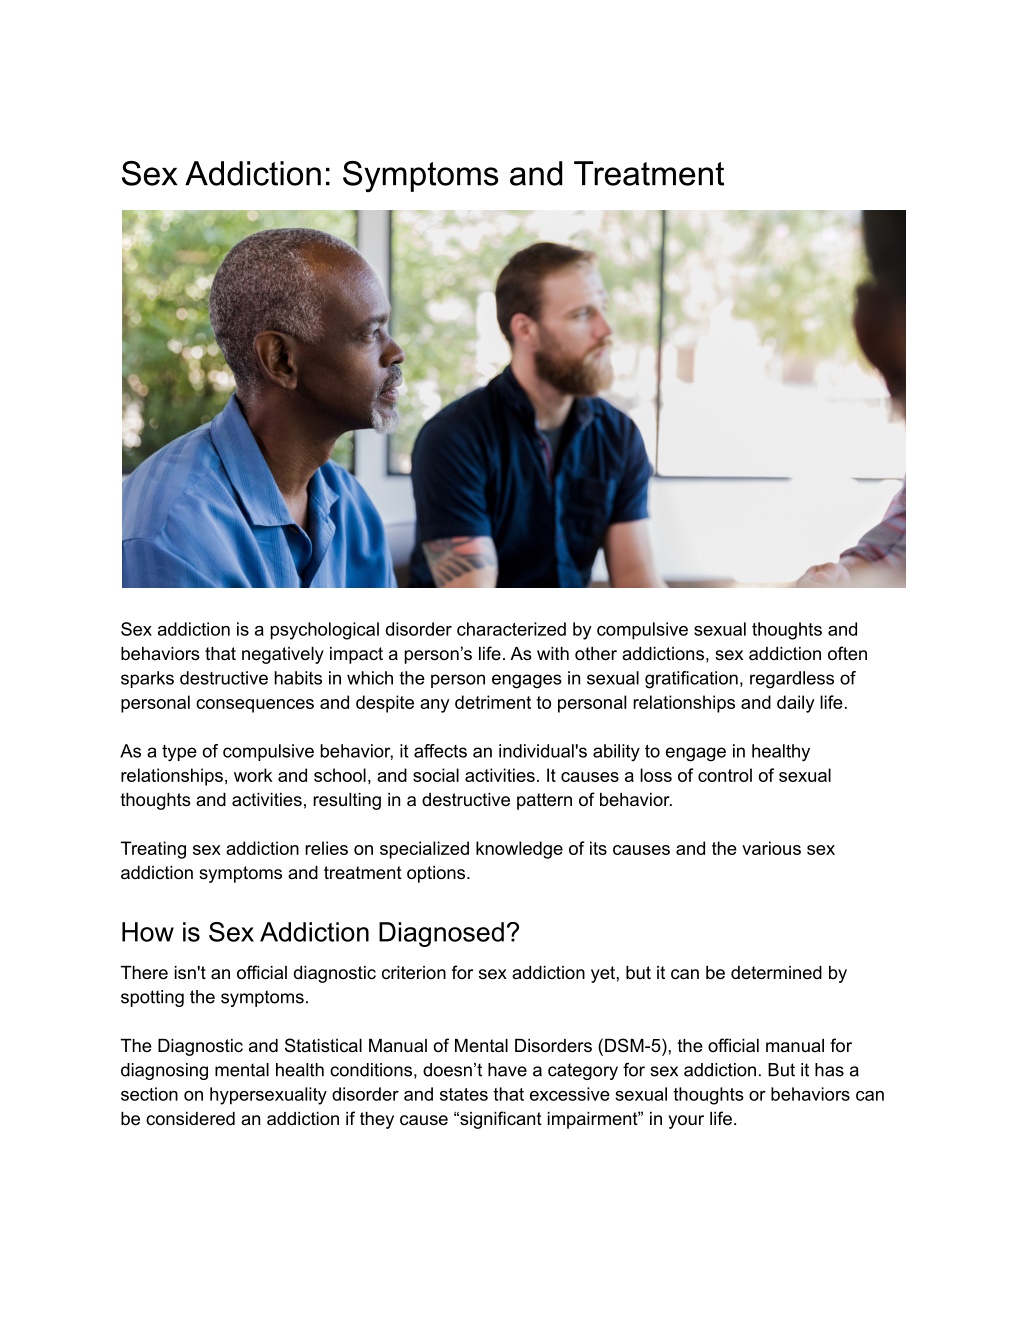 Ppt Sex Addiction Symptoms And Treatment Docx Powerpoint